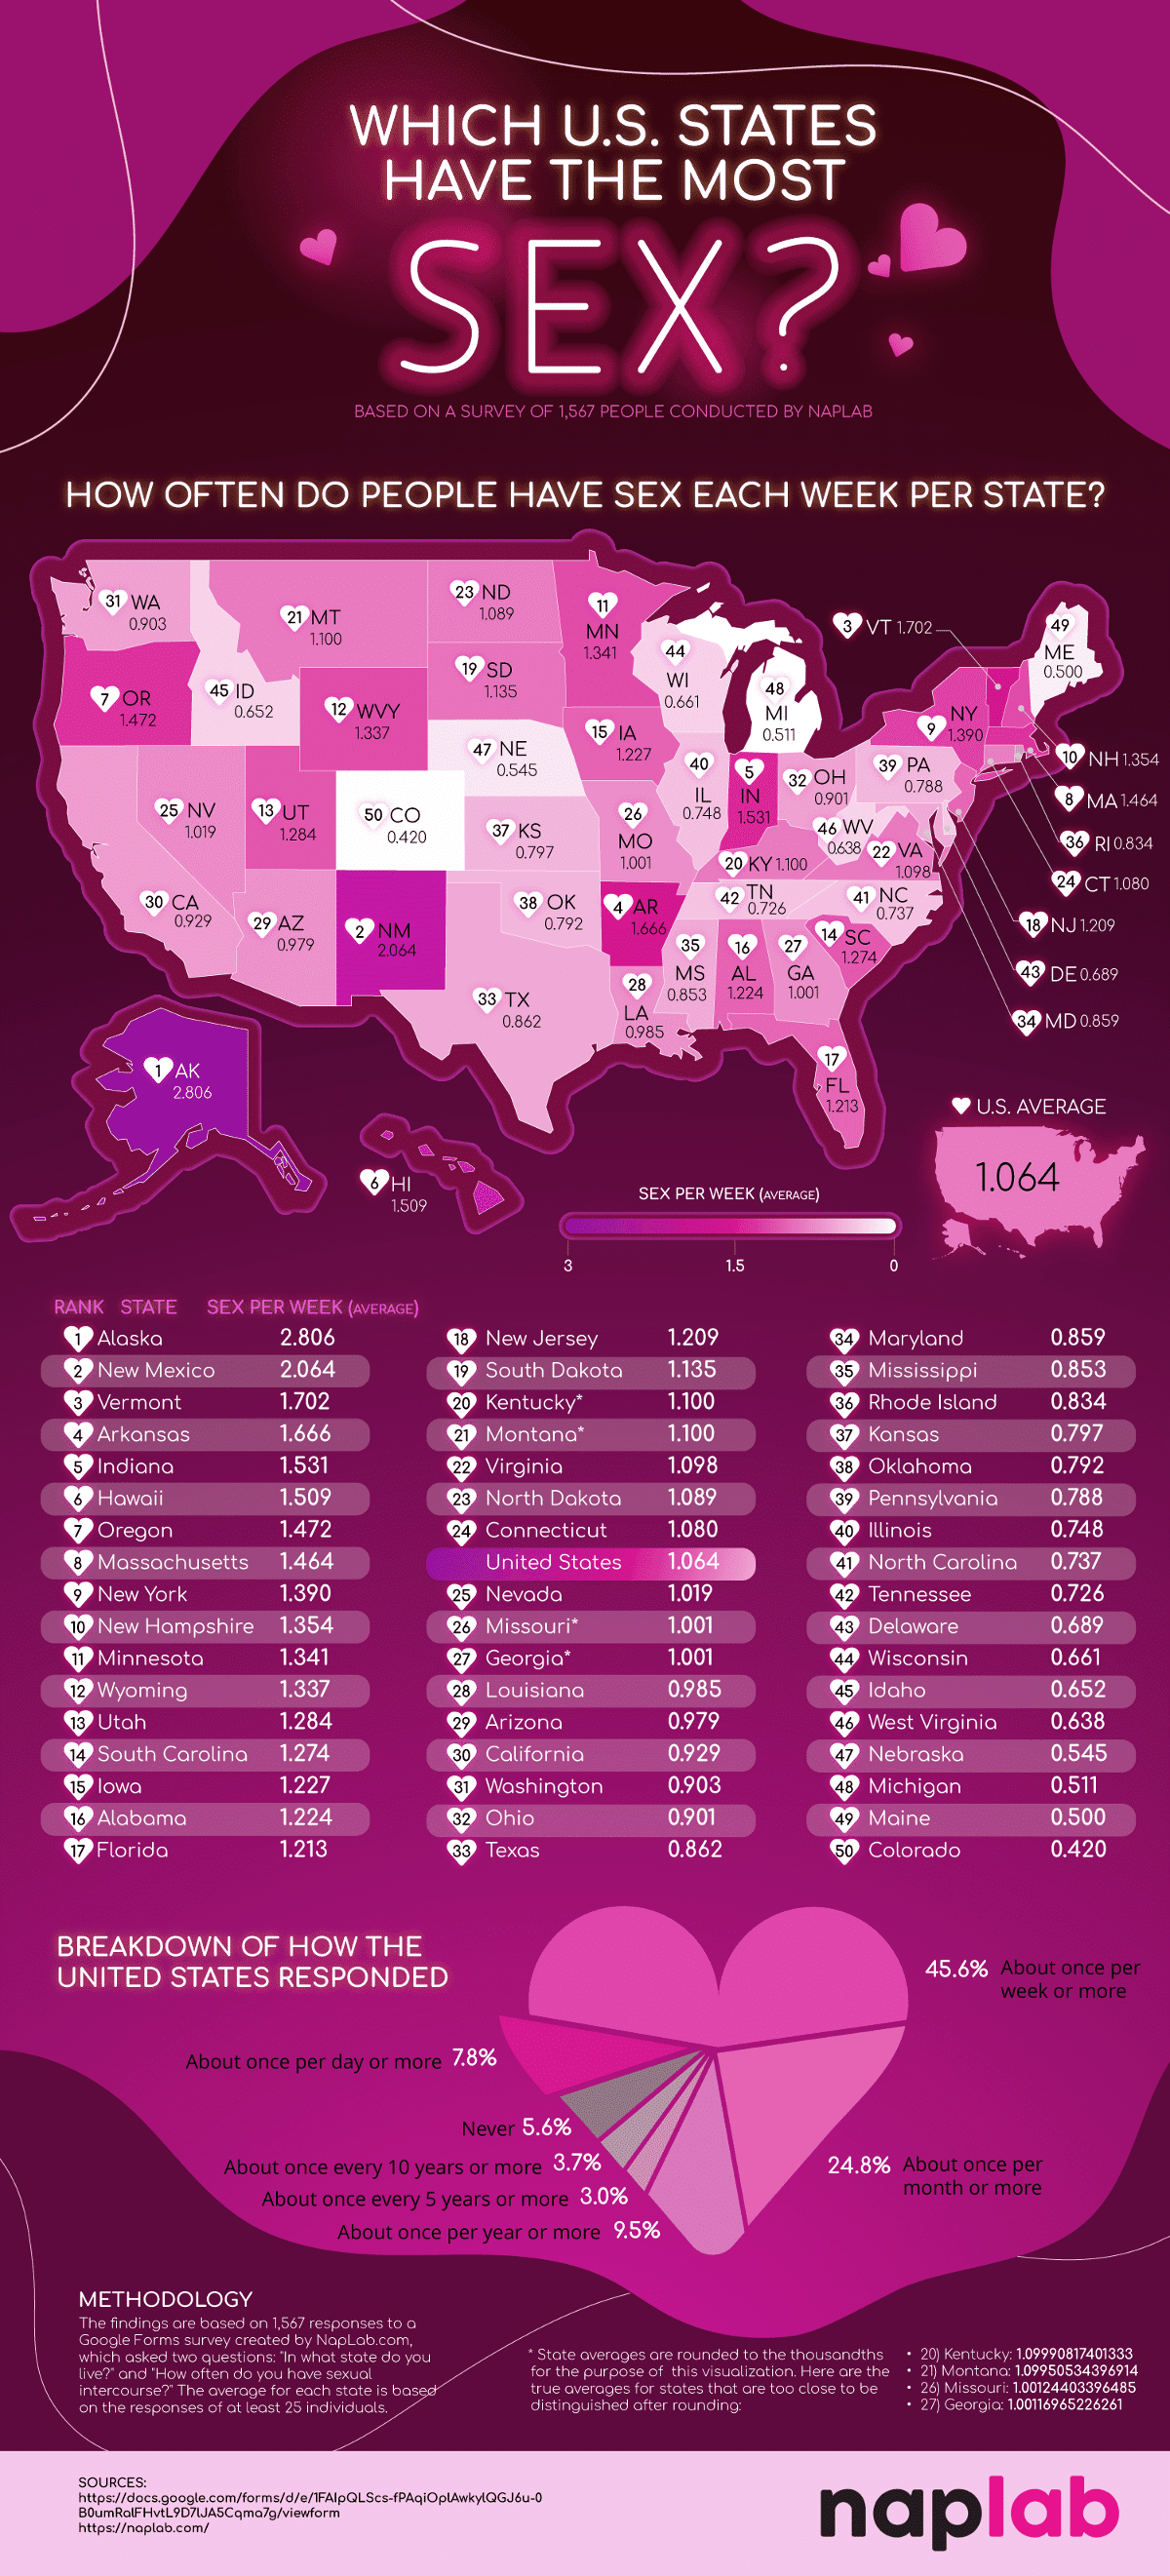 Which U.S. States Have the Most Sex?